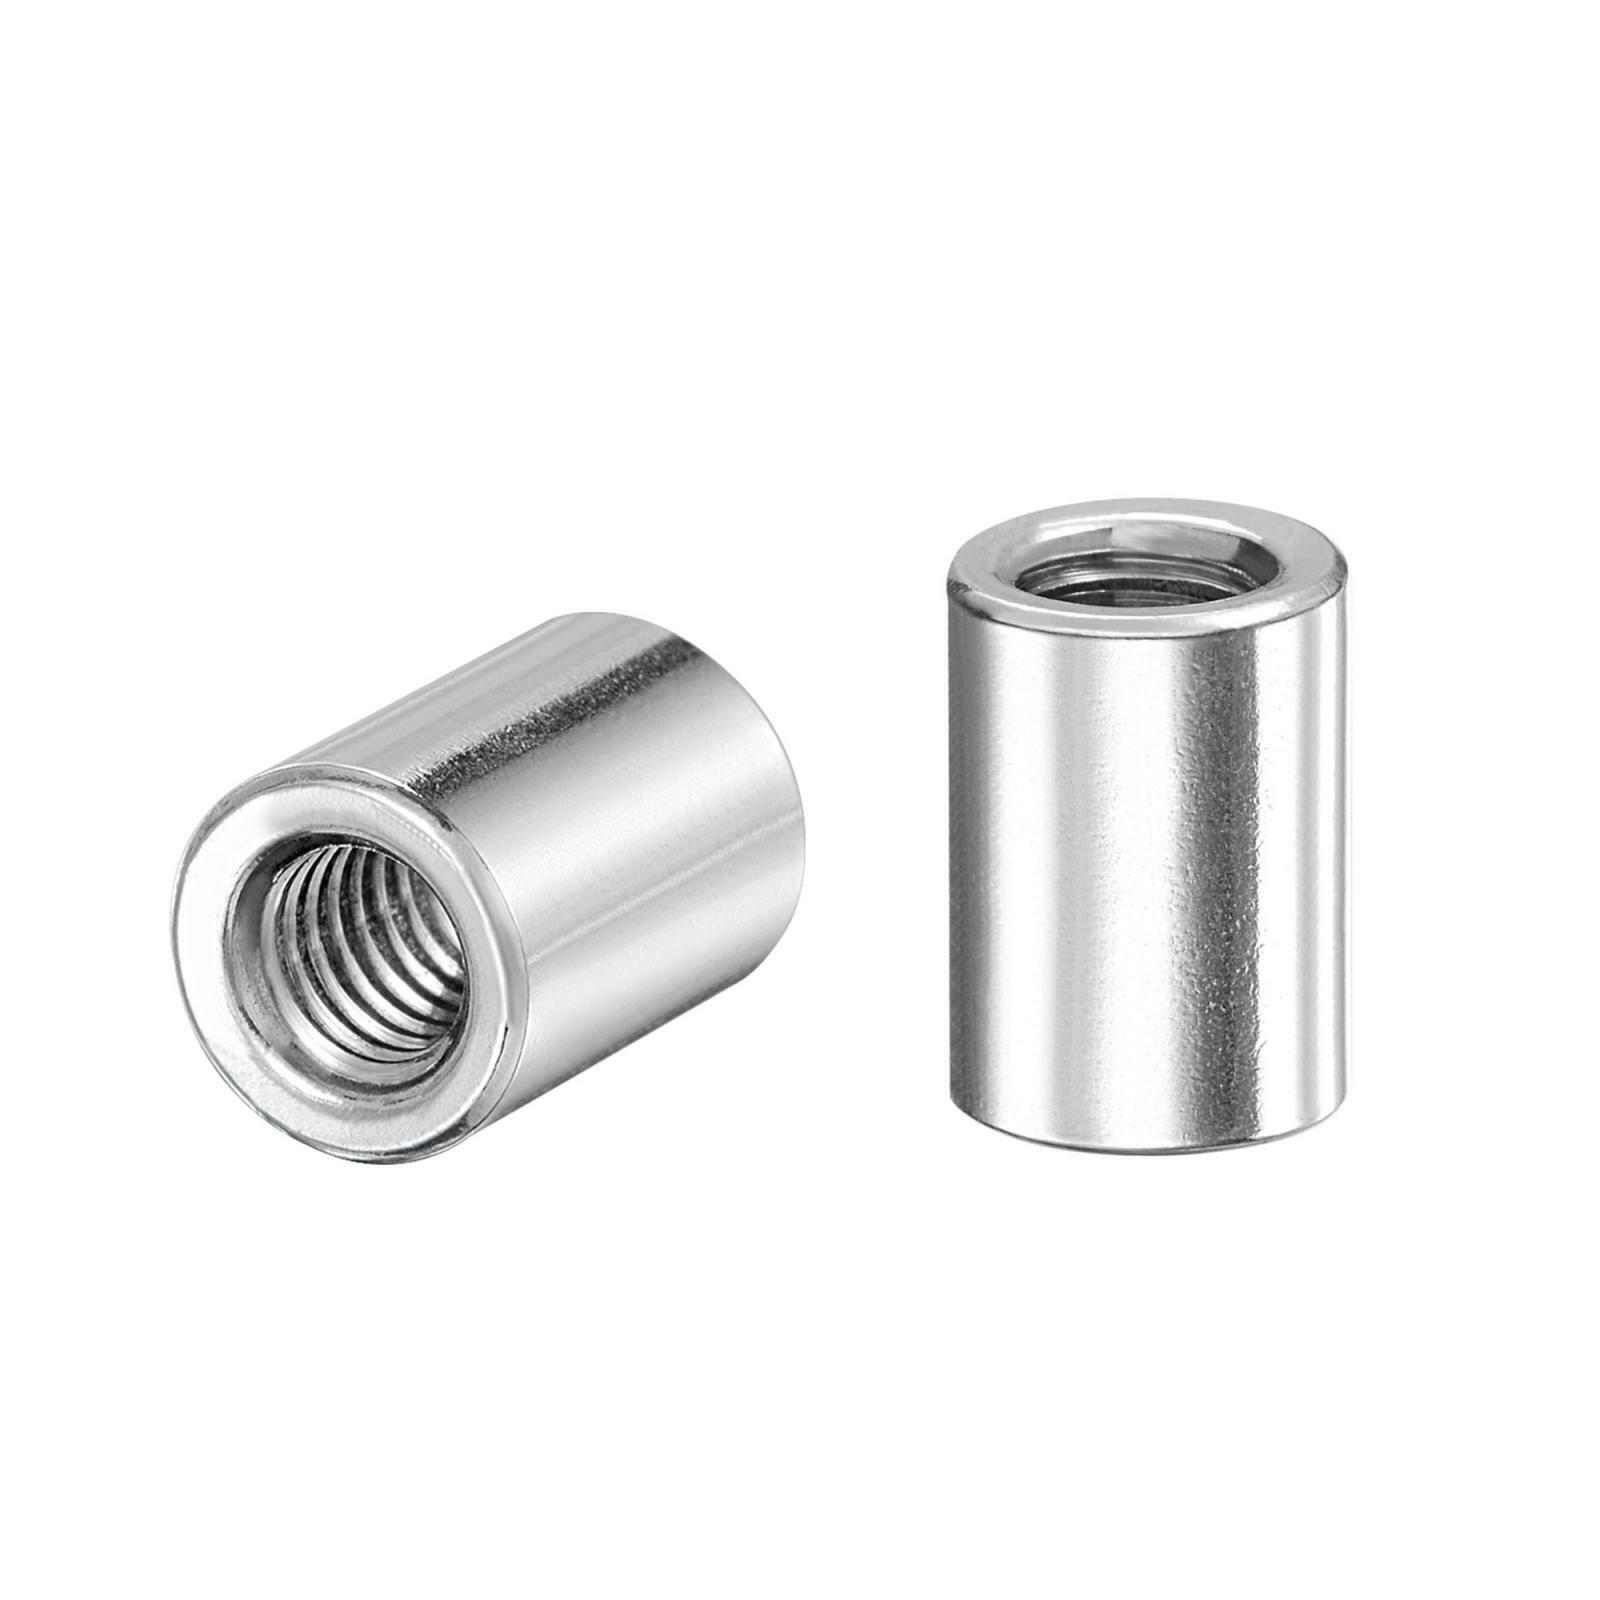 M6x10mmx13.5mm Weld On Bung Nut Threaded 201 Stainless Steel Insert 10pcs